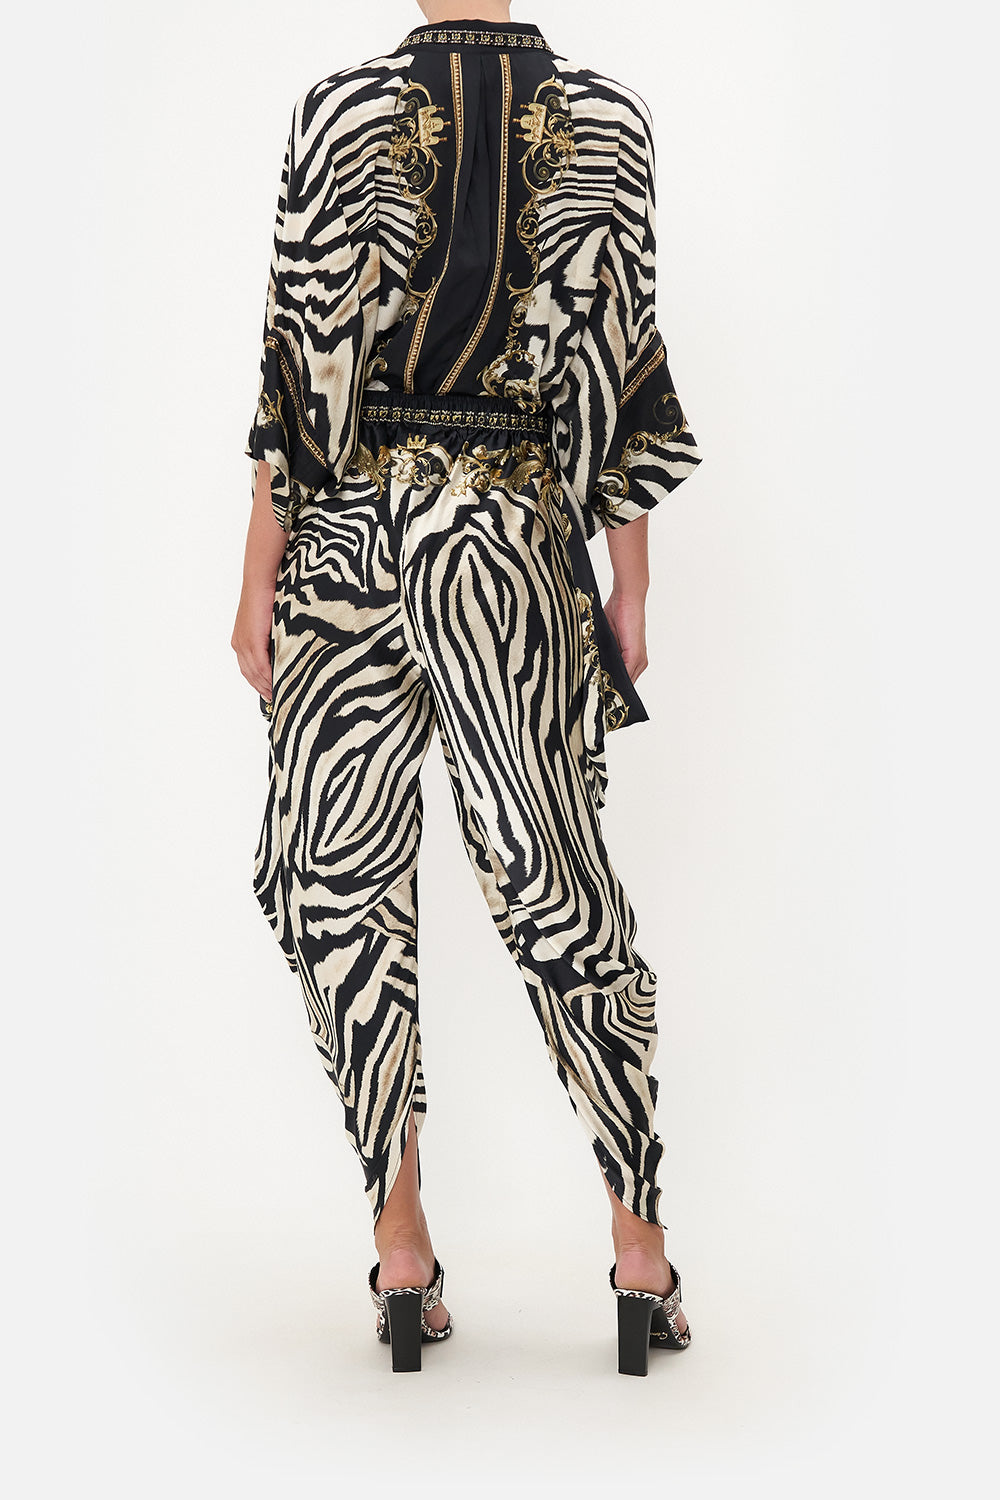 DRAPED SIDE PANT EARN YOUR STRIPES